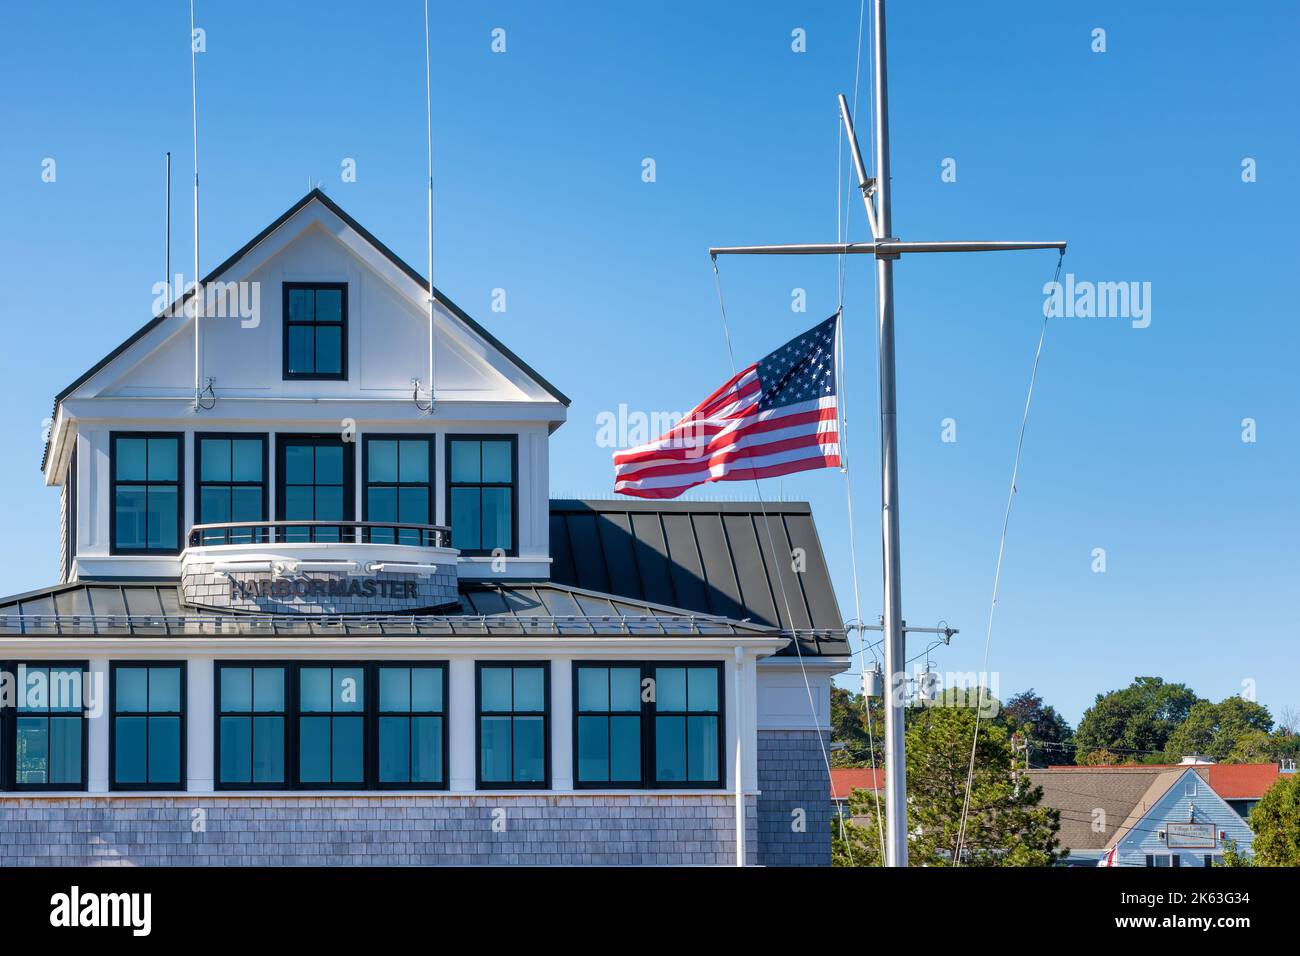 Plymouth, Massachusetts, USA - September 15, 2022: Harbor Master head quarters with the American Flag flyin in the breeze at Plymoth Harbor. Stock Photo